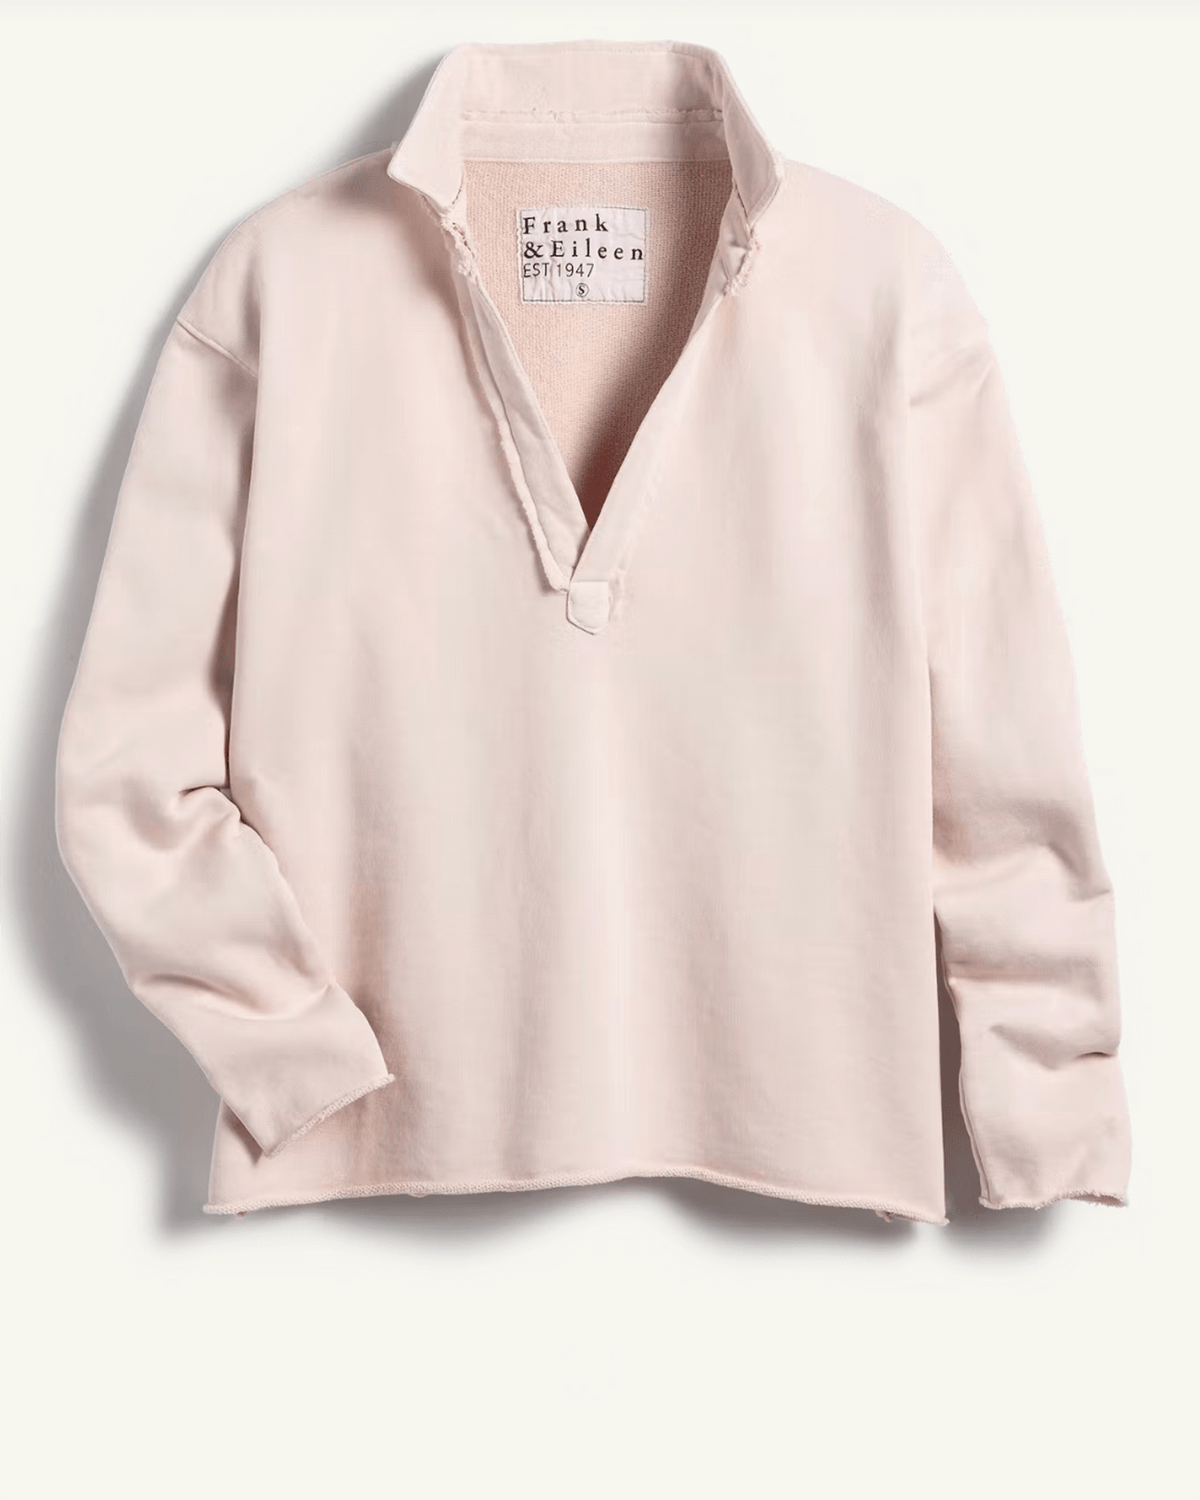 Tee Lab Clothing Popover Henley in Vintage Rose